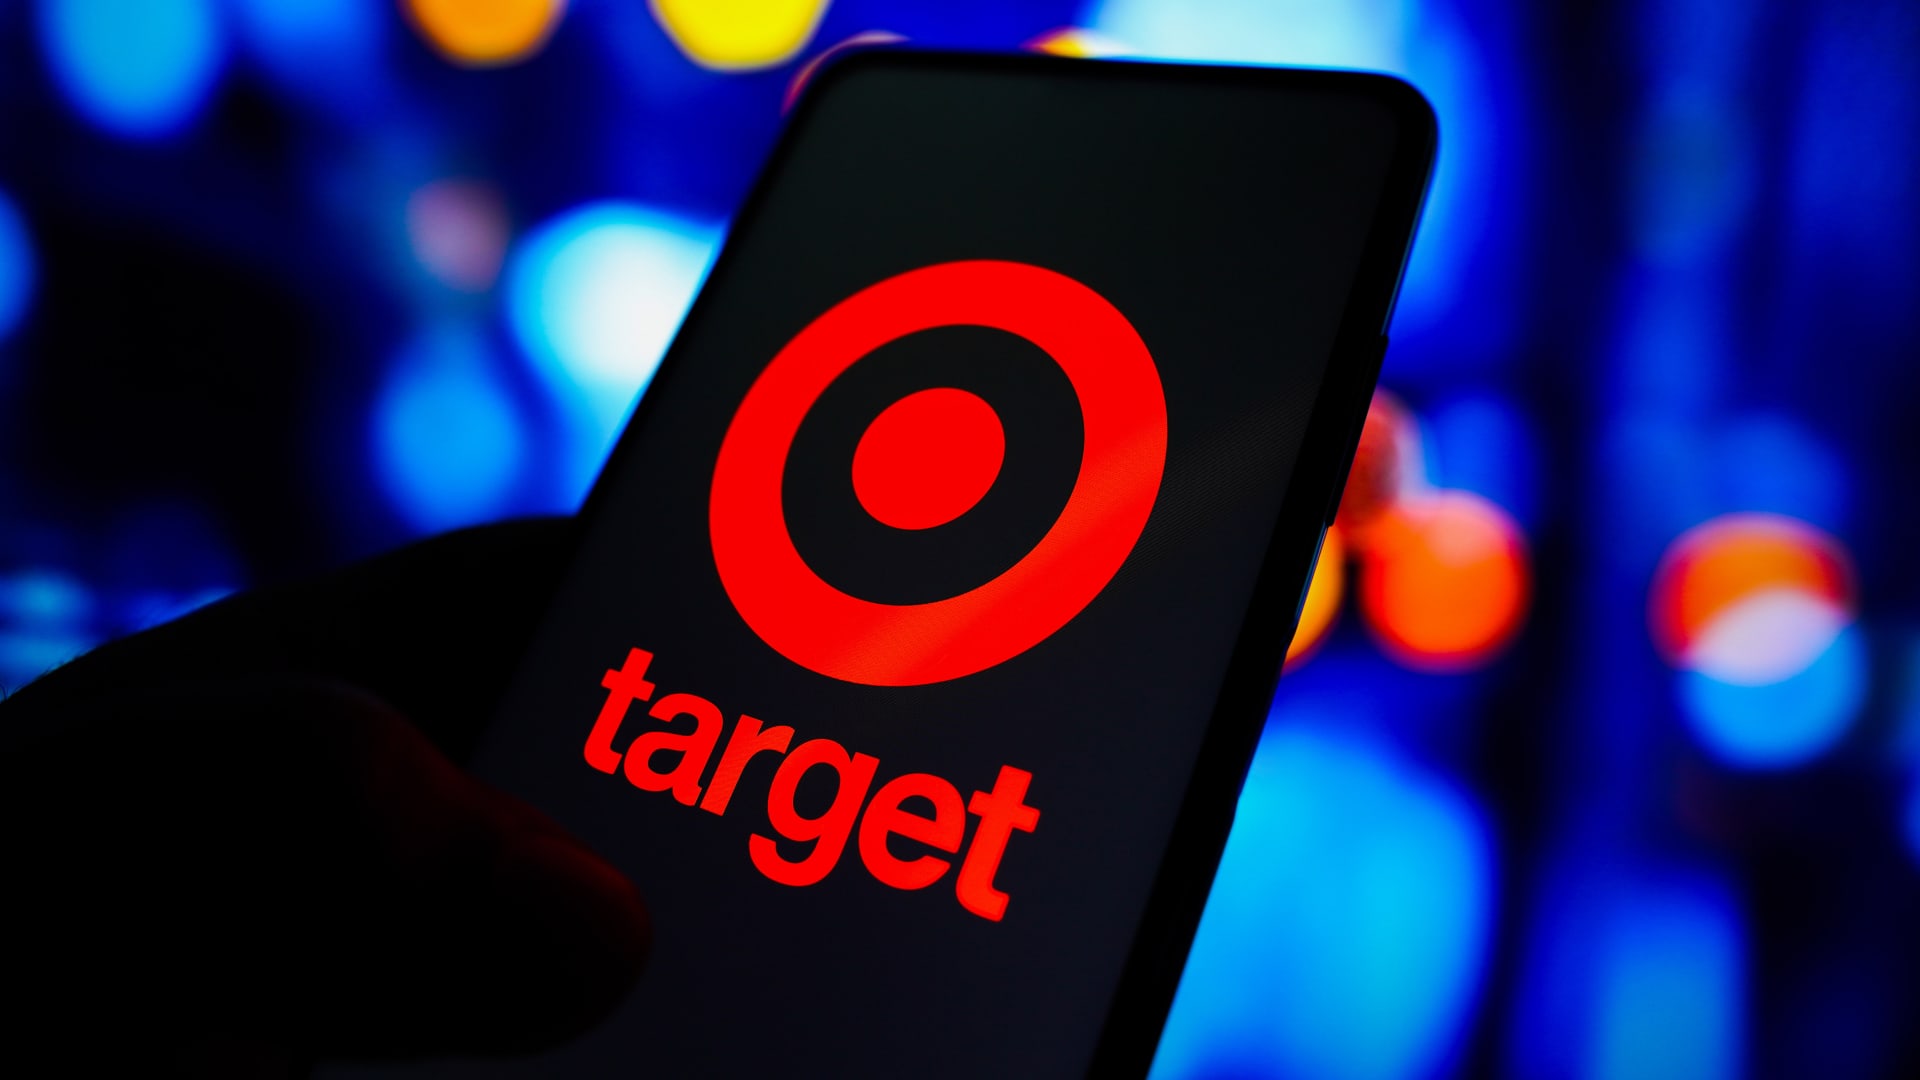 Target bets on e-commerce, invests in delivery hubs